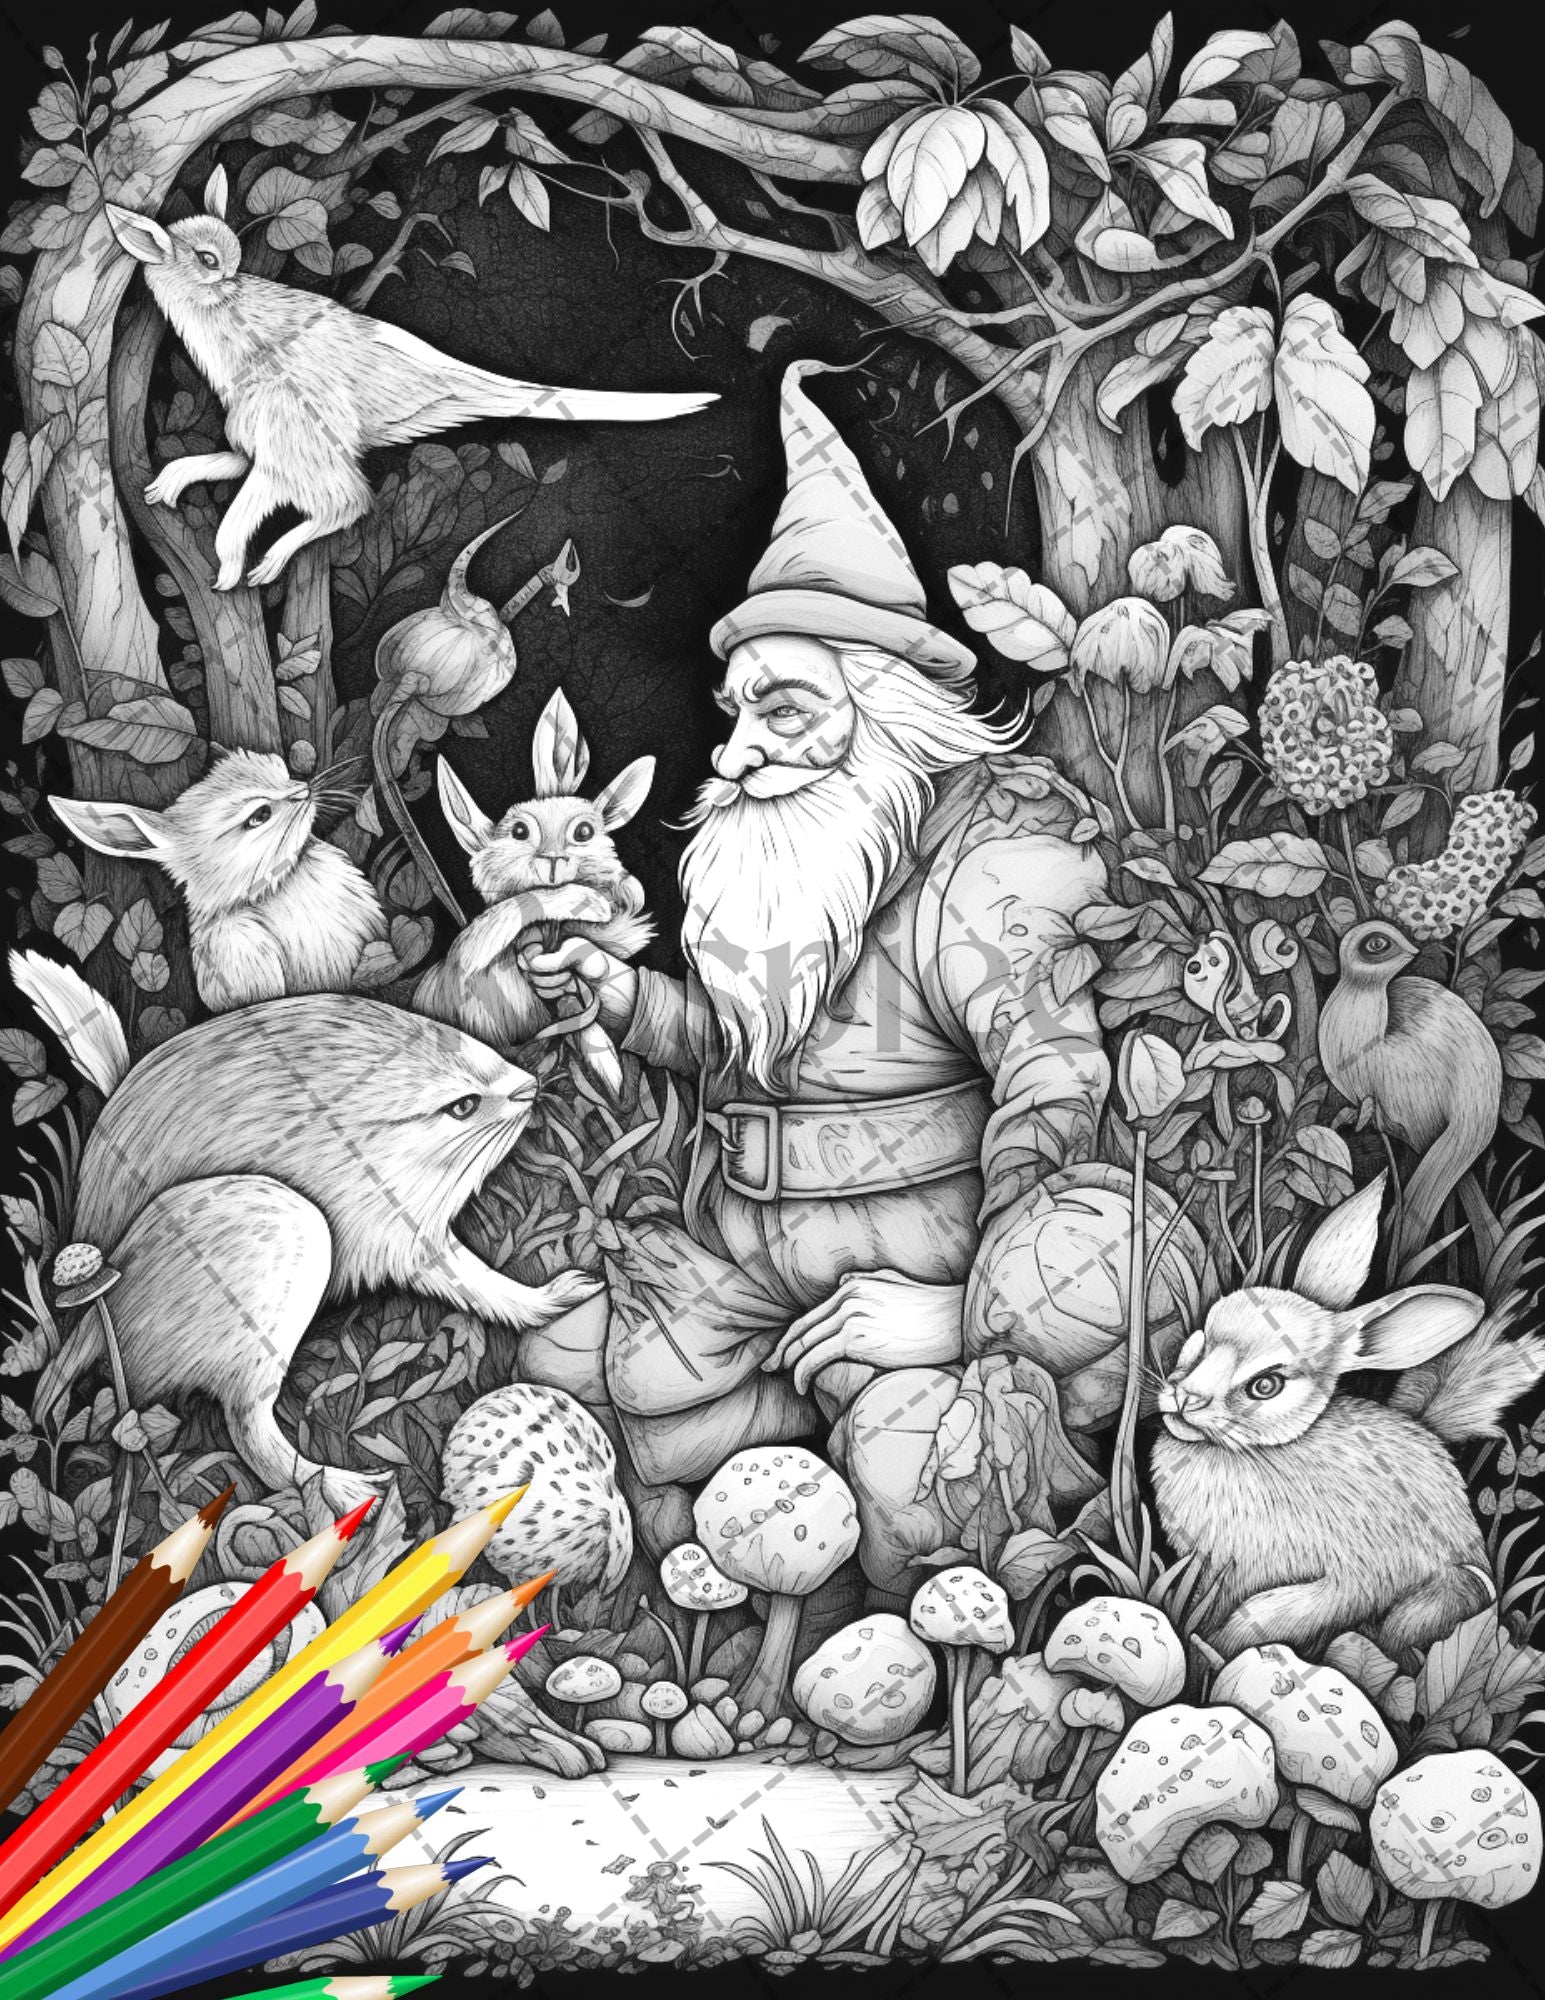 Gnome Coloring Book For Adults: 20 Gnome Stress Relief Coloring Pages For  Adults To Help Create Mindfulness (Pattern #20) (Paperback)